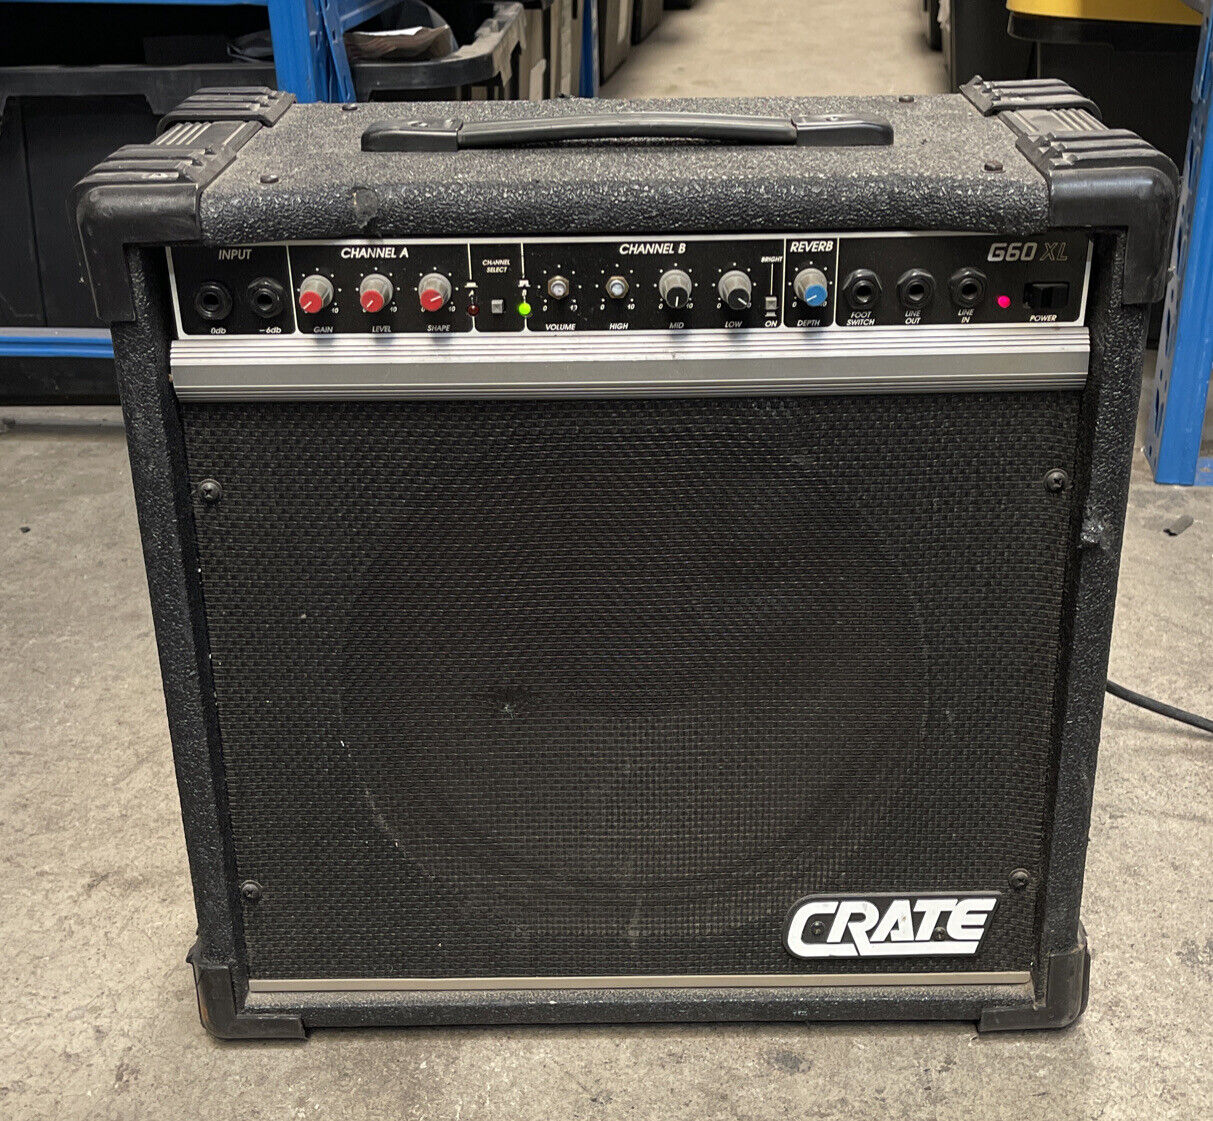 Crate G60XL Solid State Guitar Amp 50 Watts Tested